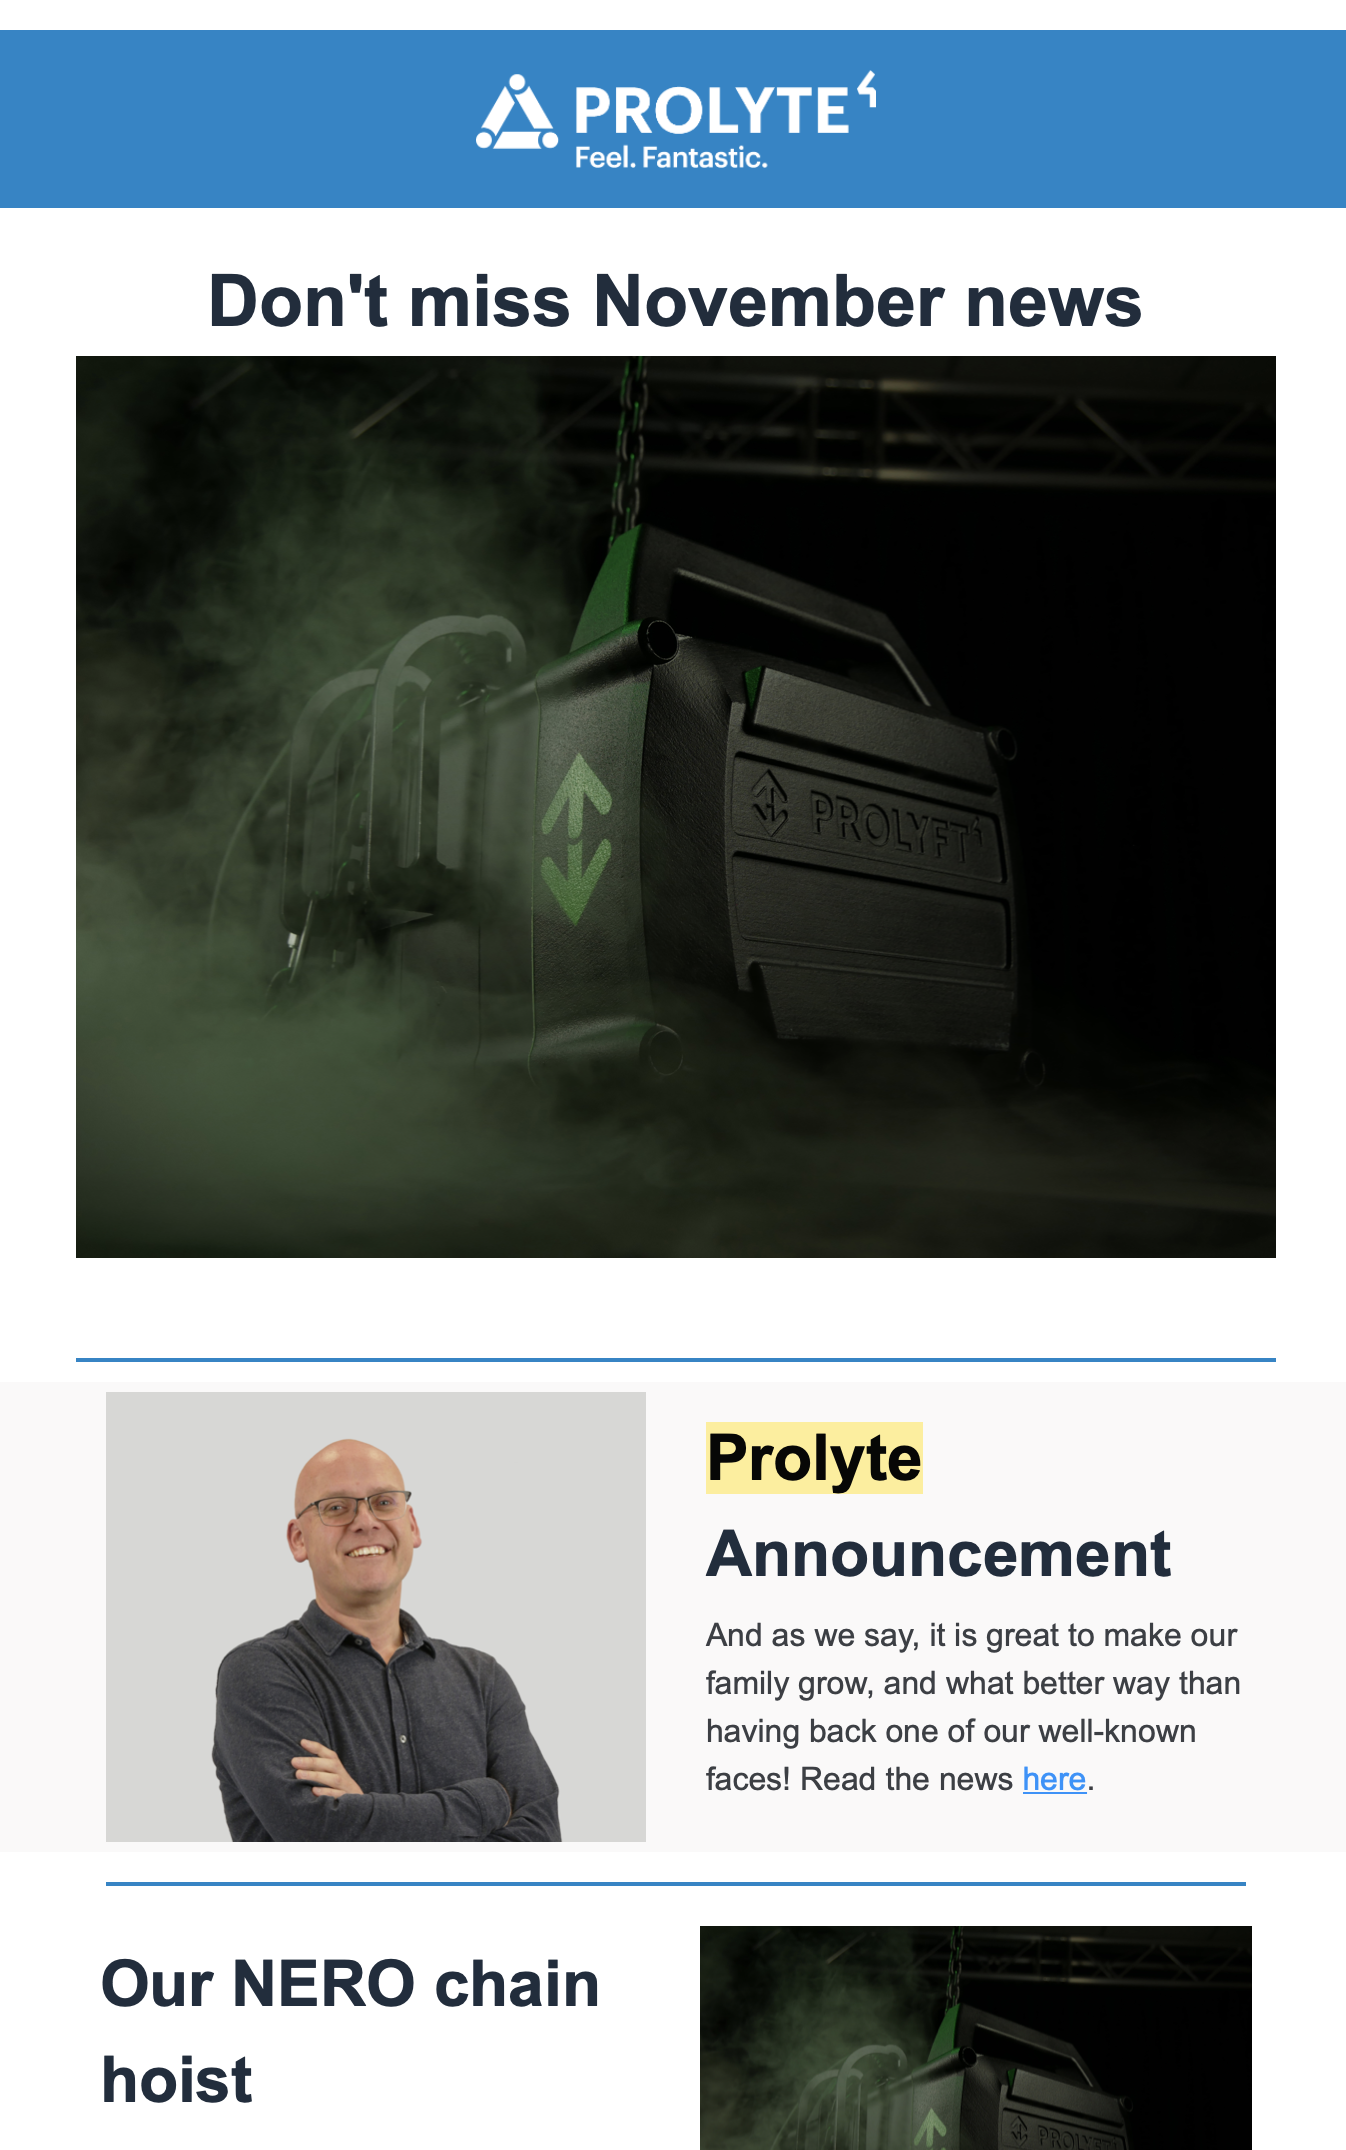 Prolyte newsletters